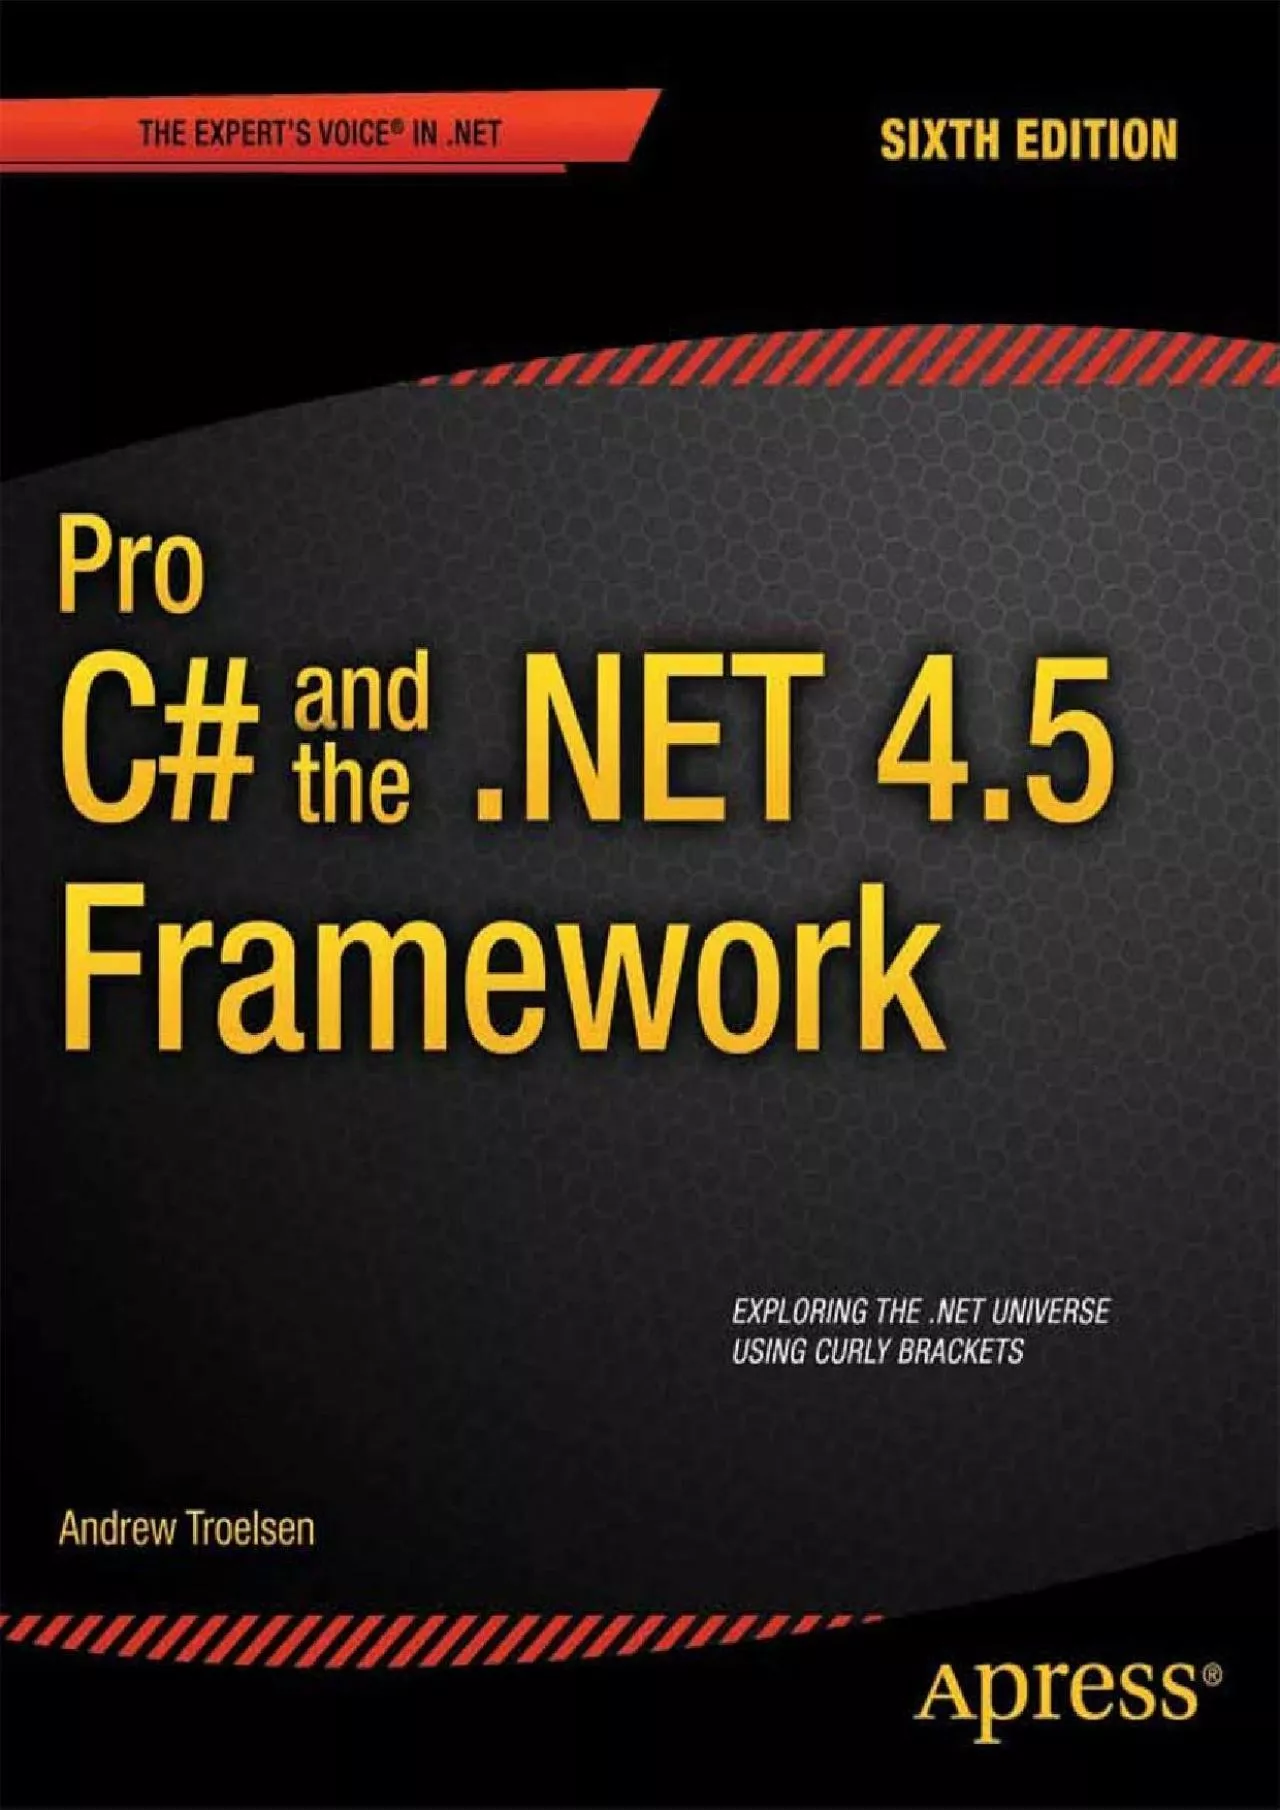 [READING BOOK]-Pro C 5.0 and the .NET 4.5 Framework (Expert\'s Voice in .NET)